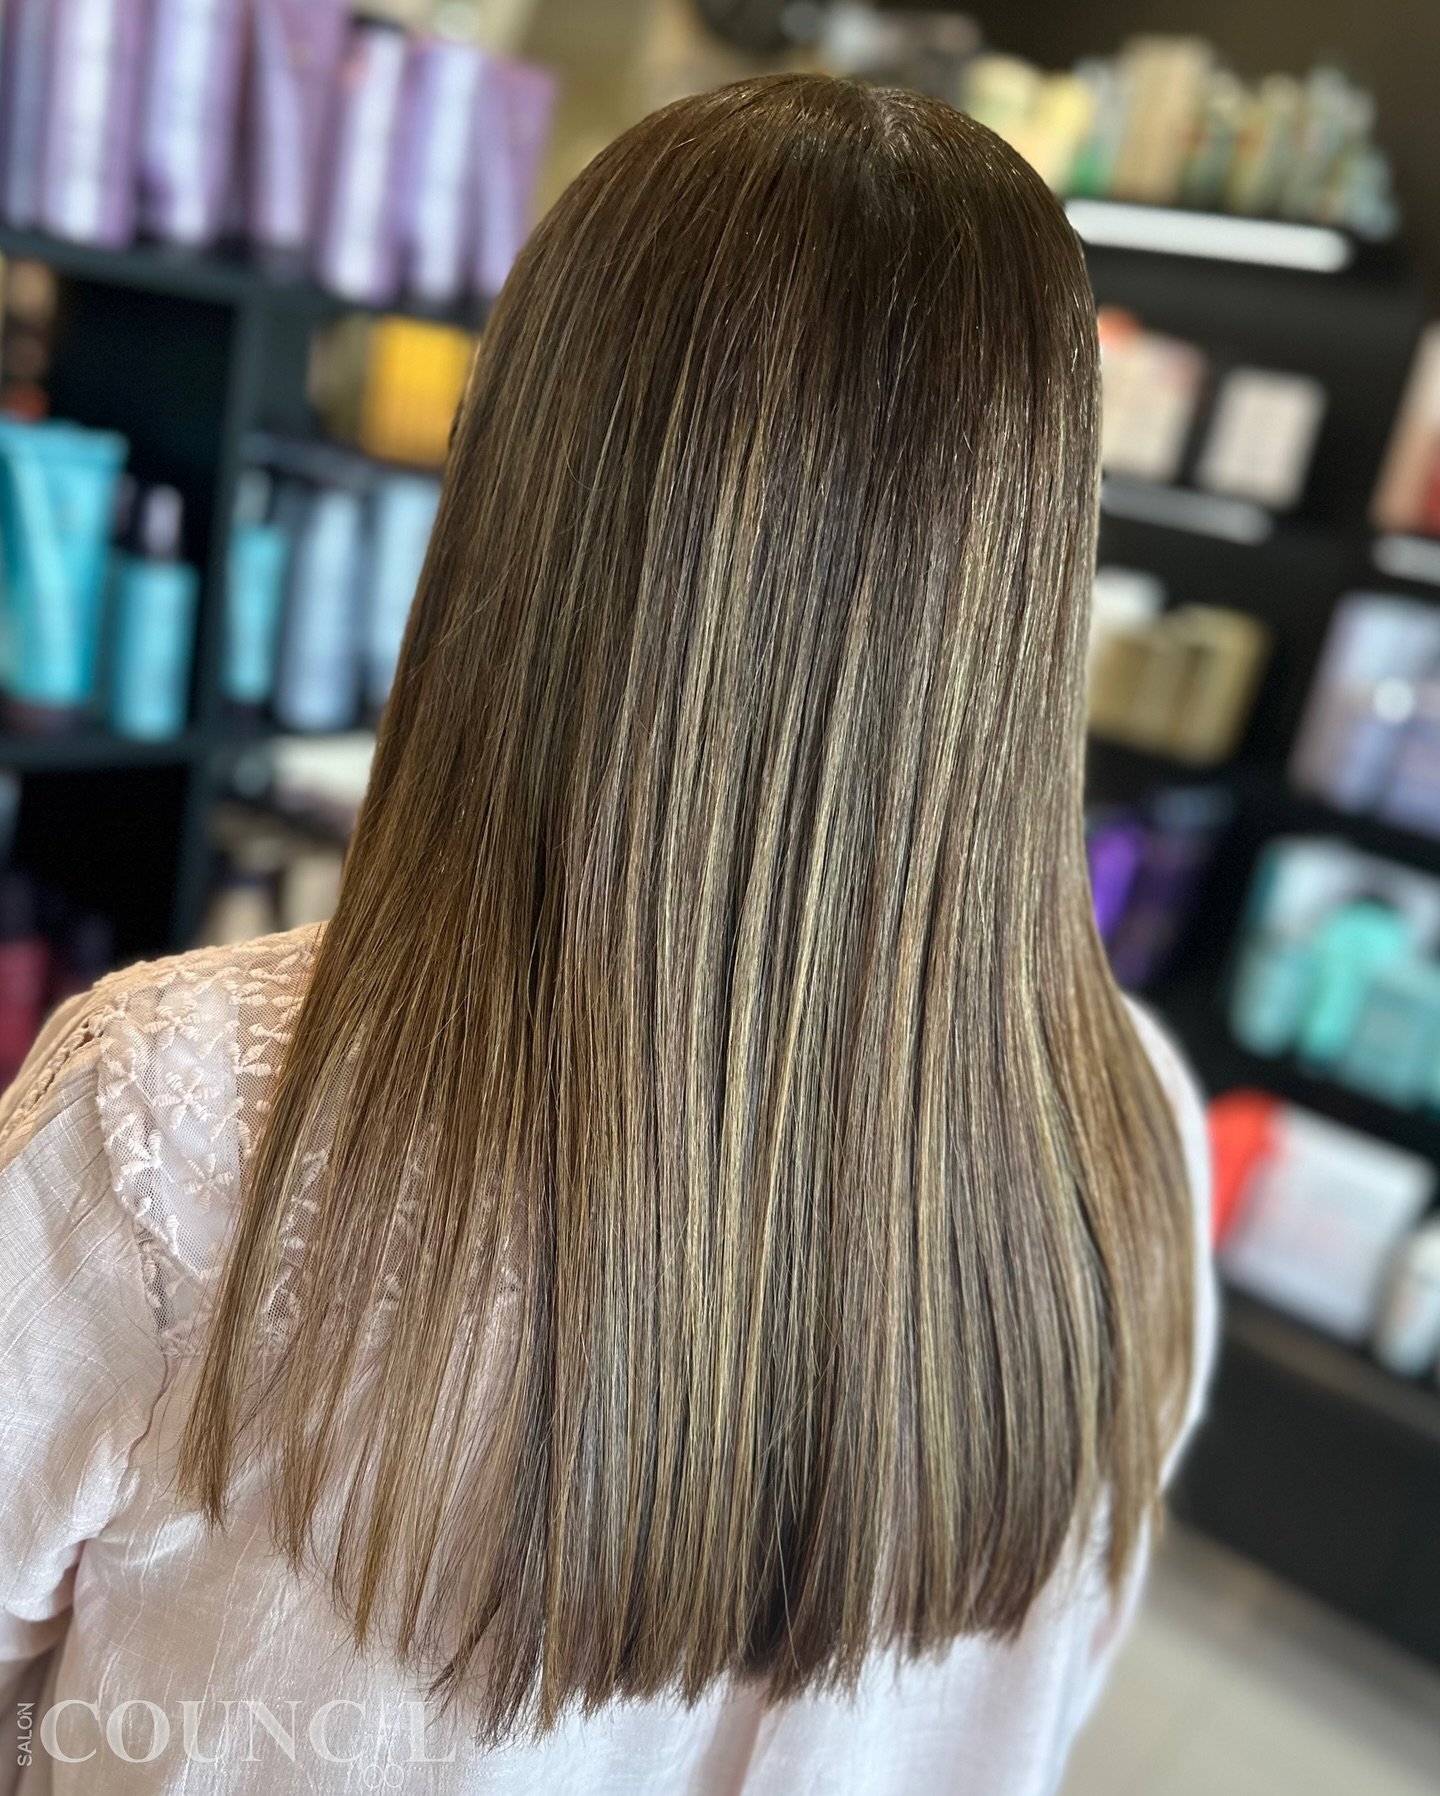 🌿#keratin
Say goodbye to frizz and hello to flawless! 🌟 Experience our Keratin smoothing and volume reducer treatment infused with apple stem cells for a sleek, manageable look that lasts. 
Embrace your hair&rsquo;s natural beauty, enhanced with cu